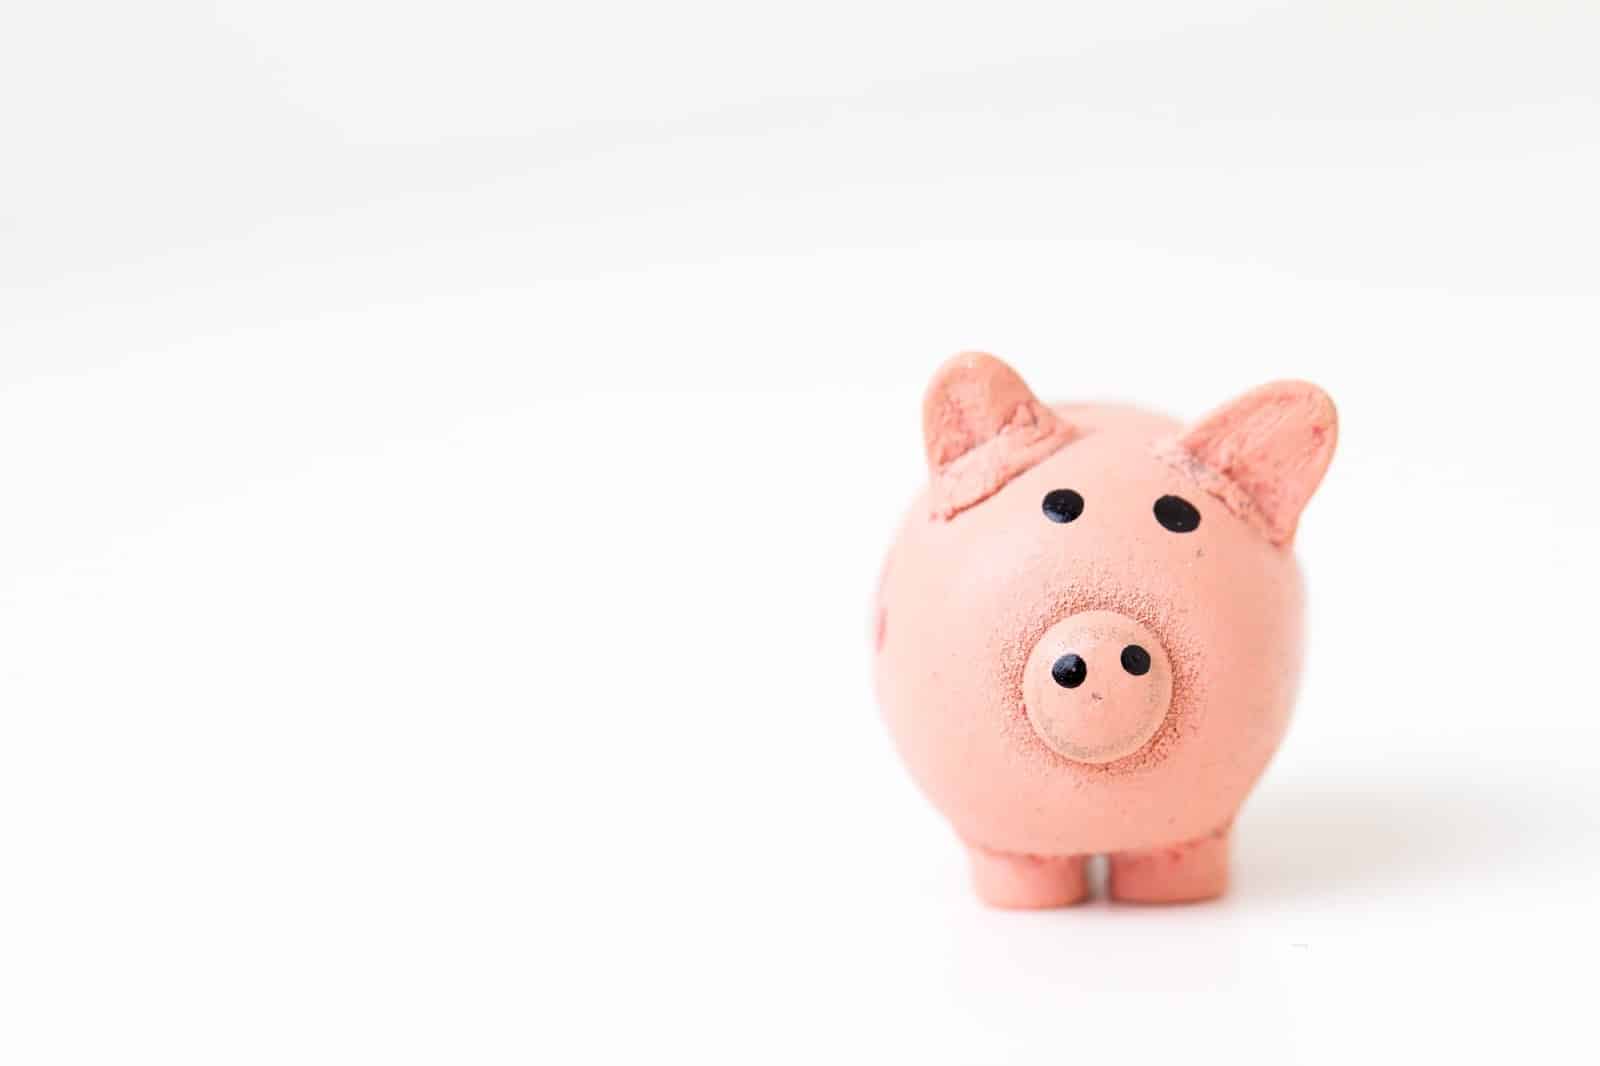 Image of piggy bank for financial services affiliate marketing